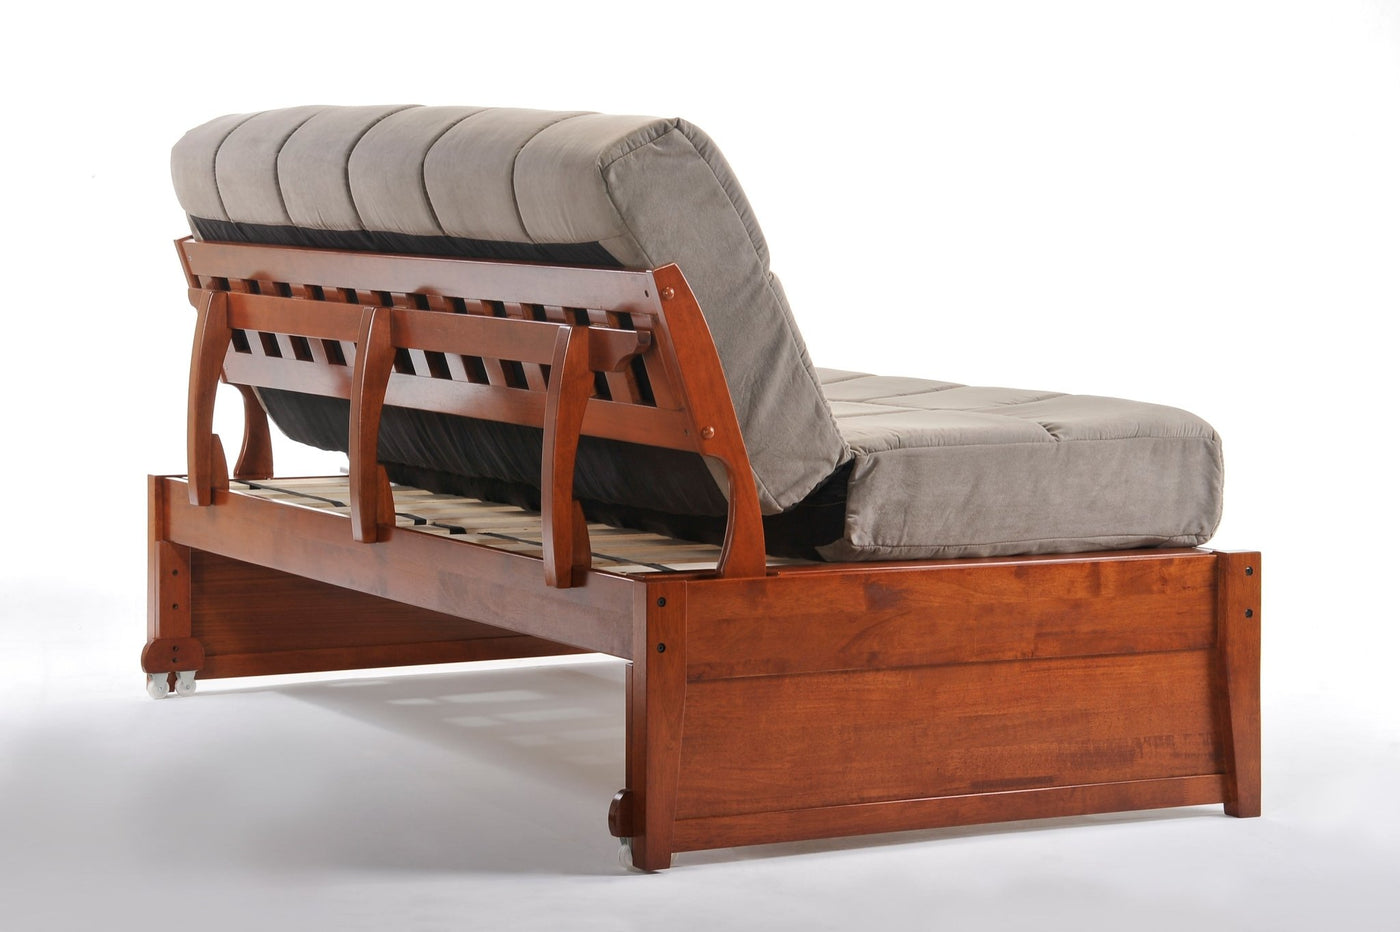 Thomas Jefferson Daybed